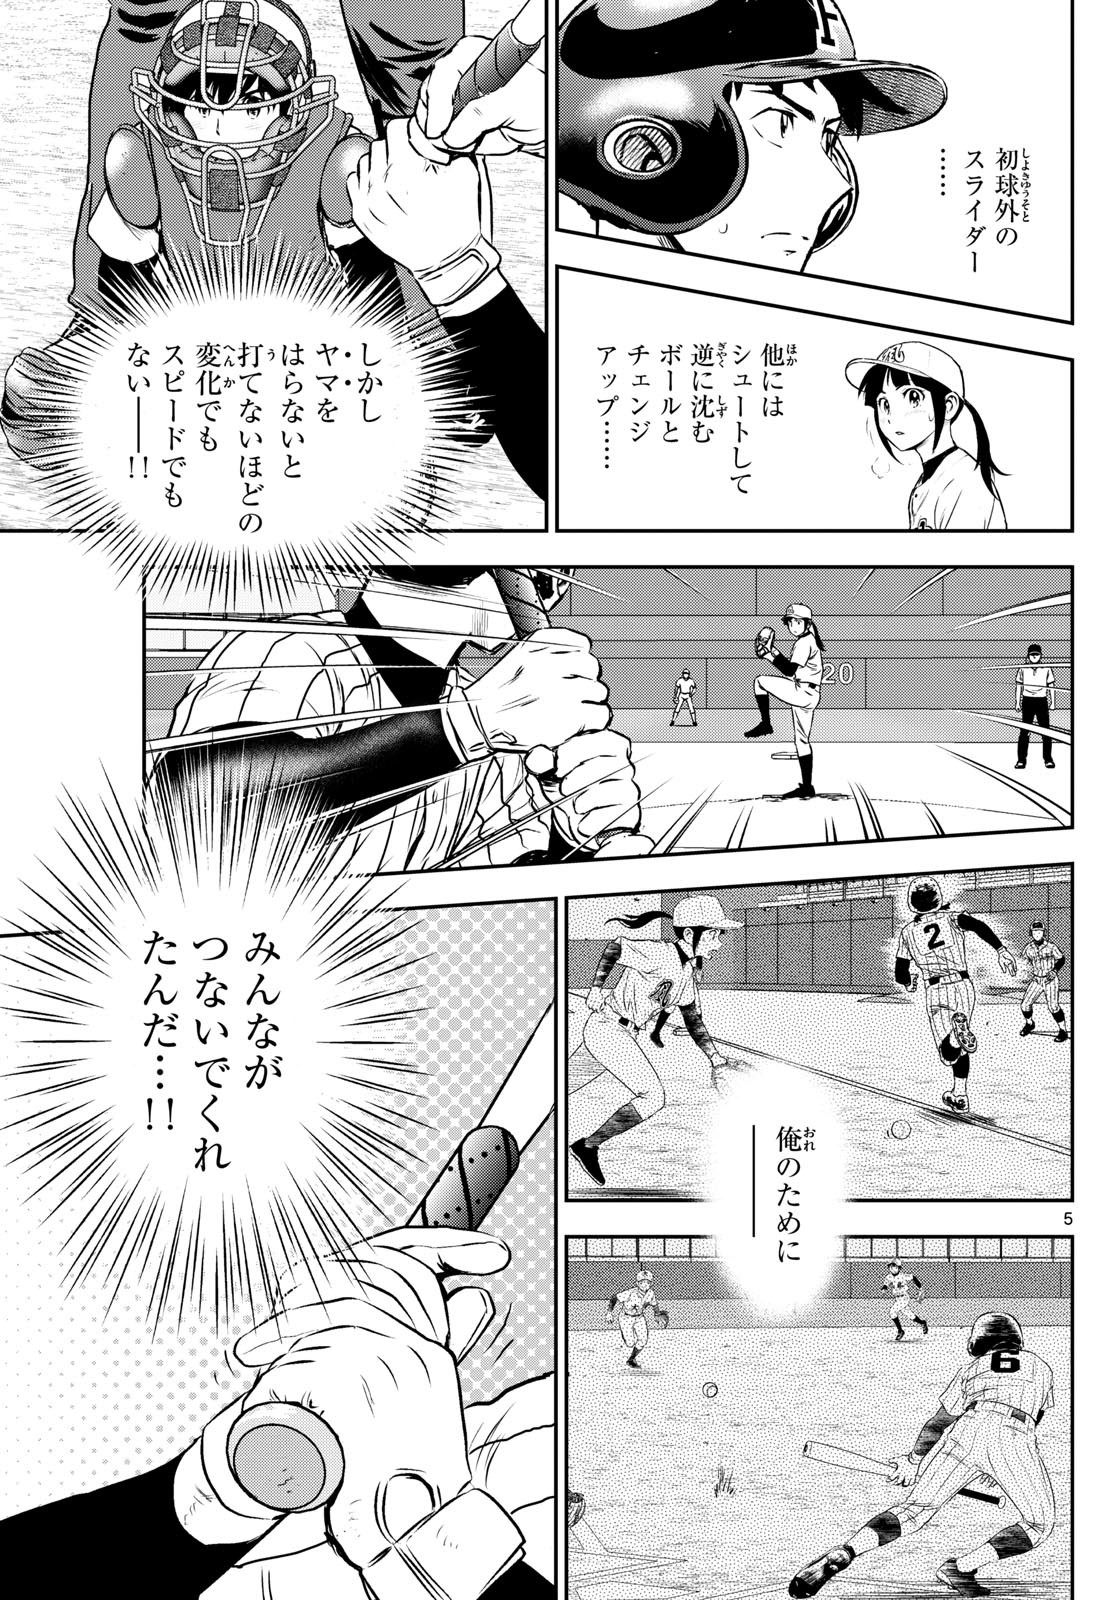 Major 2nd - メジャーセカンド - Chapter 273 - Page 5